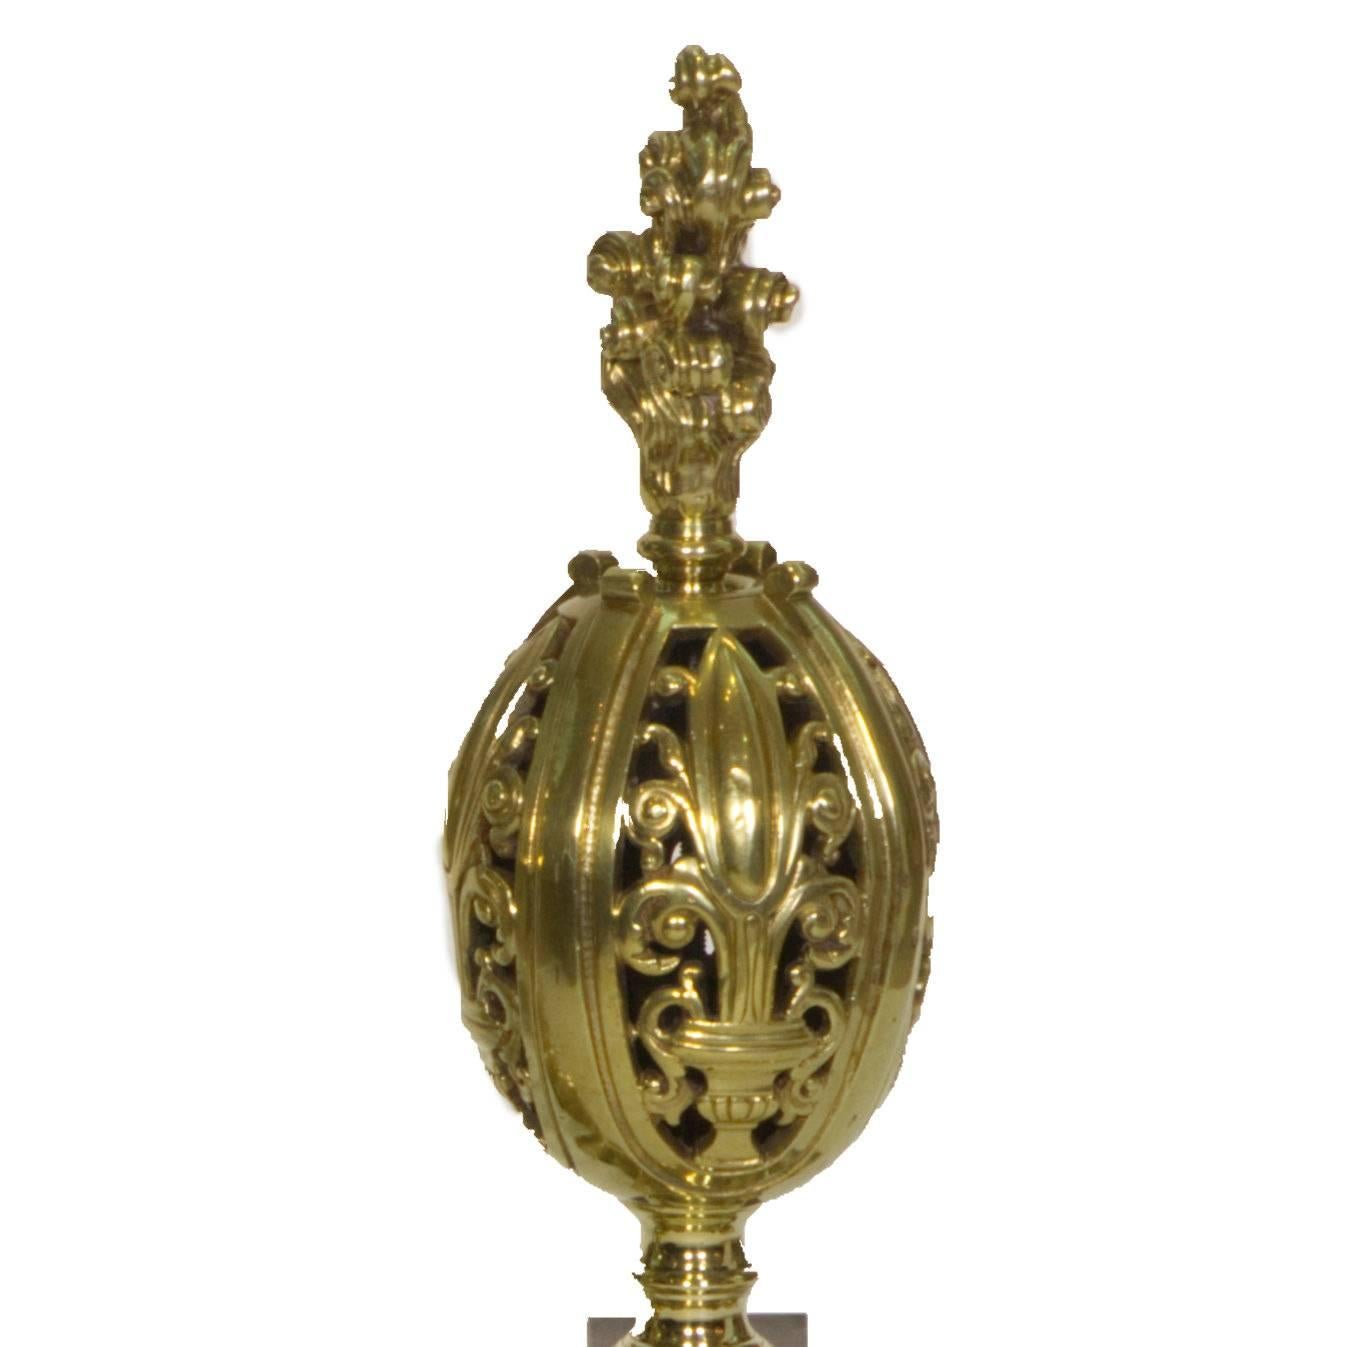 Polished 19th Century Antique Brass Fire Dogs, Pierced Globes Flame-Burst Finials